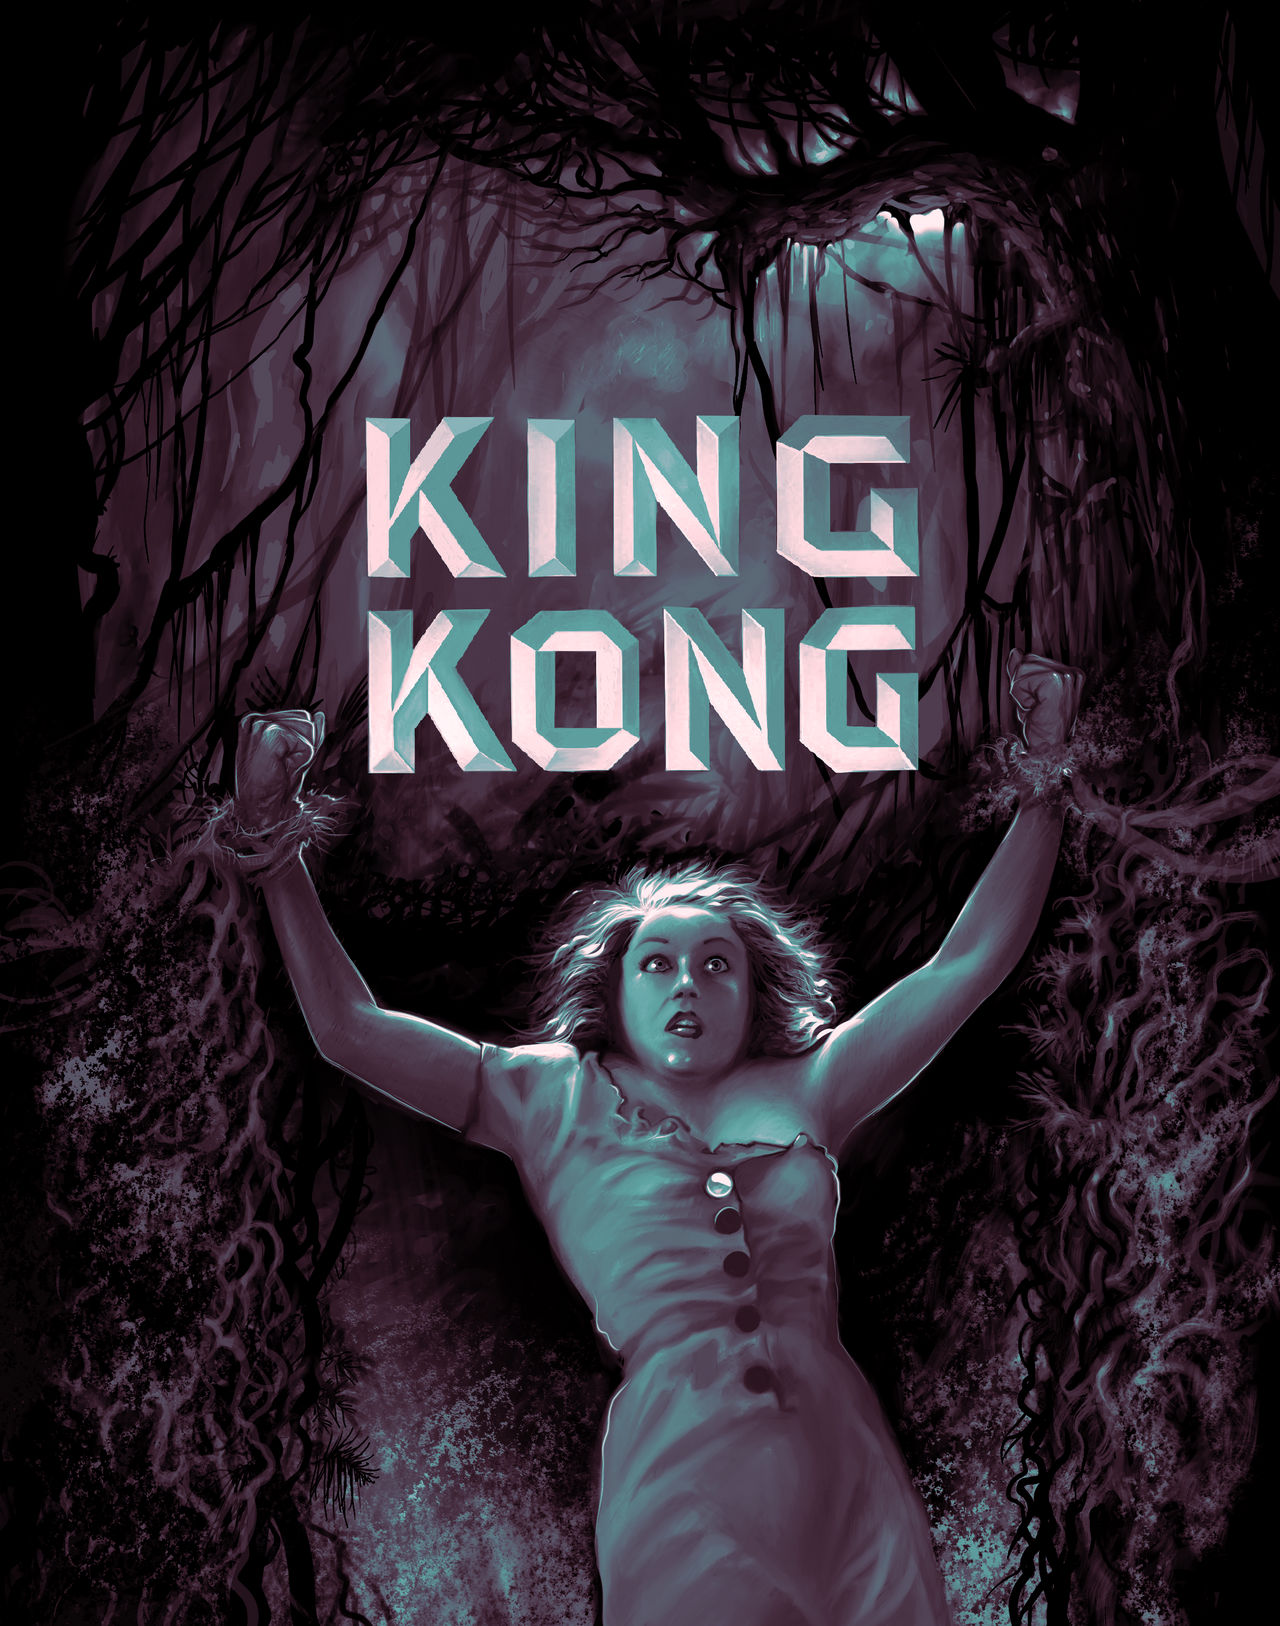 King Kong - 1933 by Harnois75 on DeviantArt